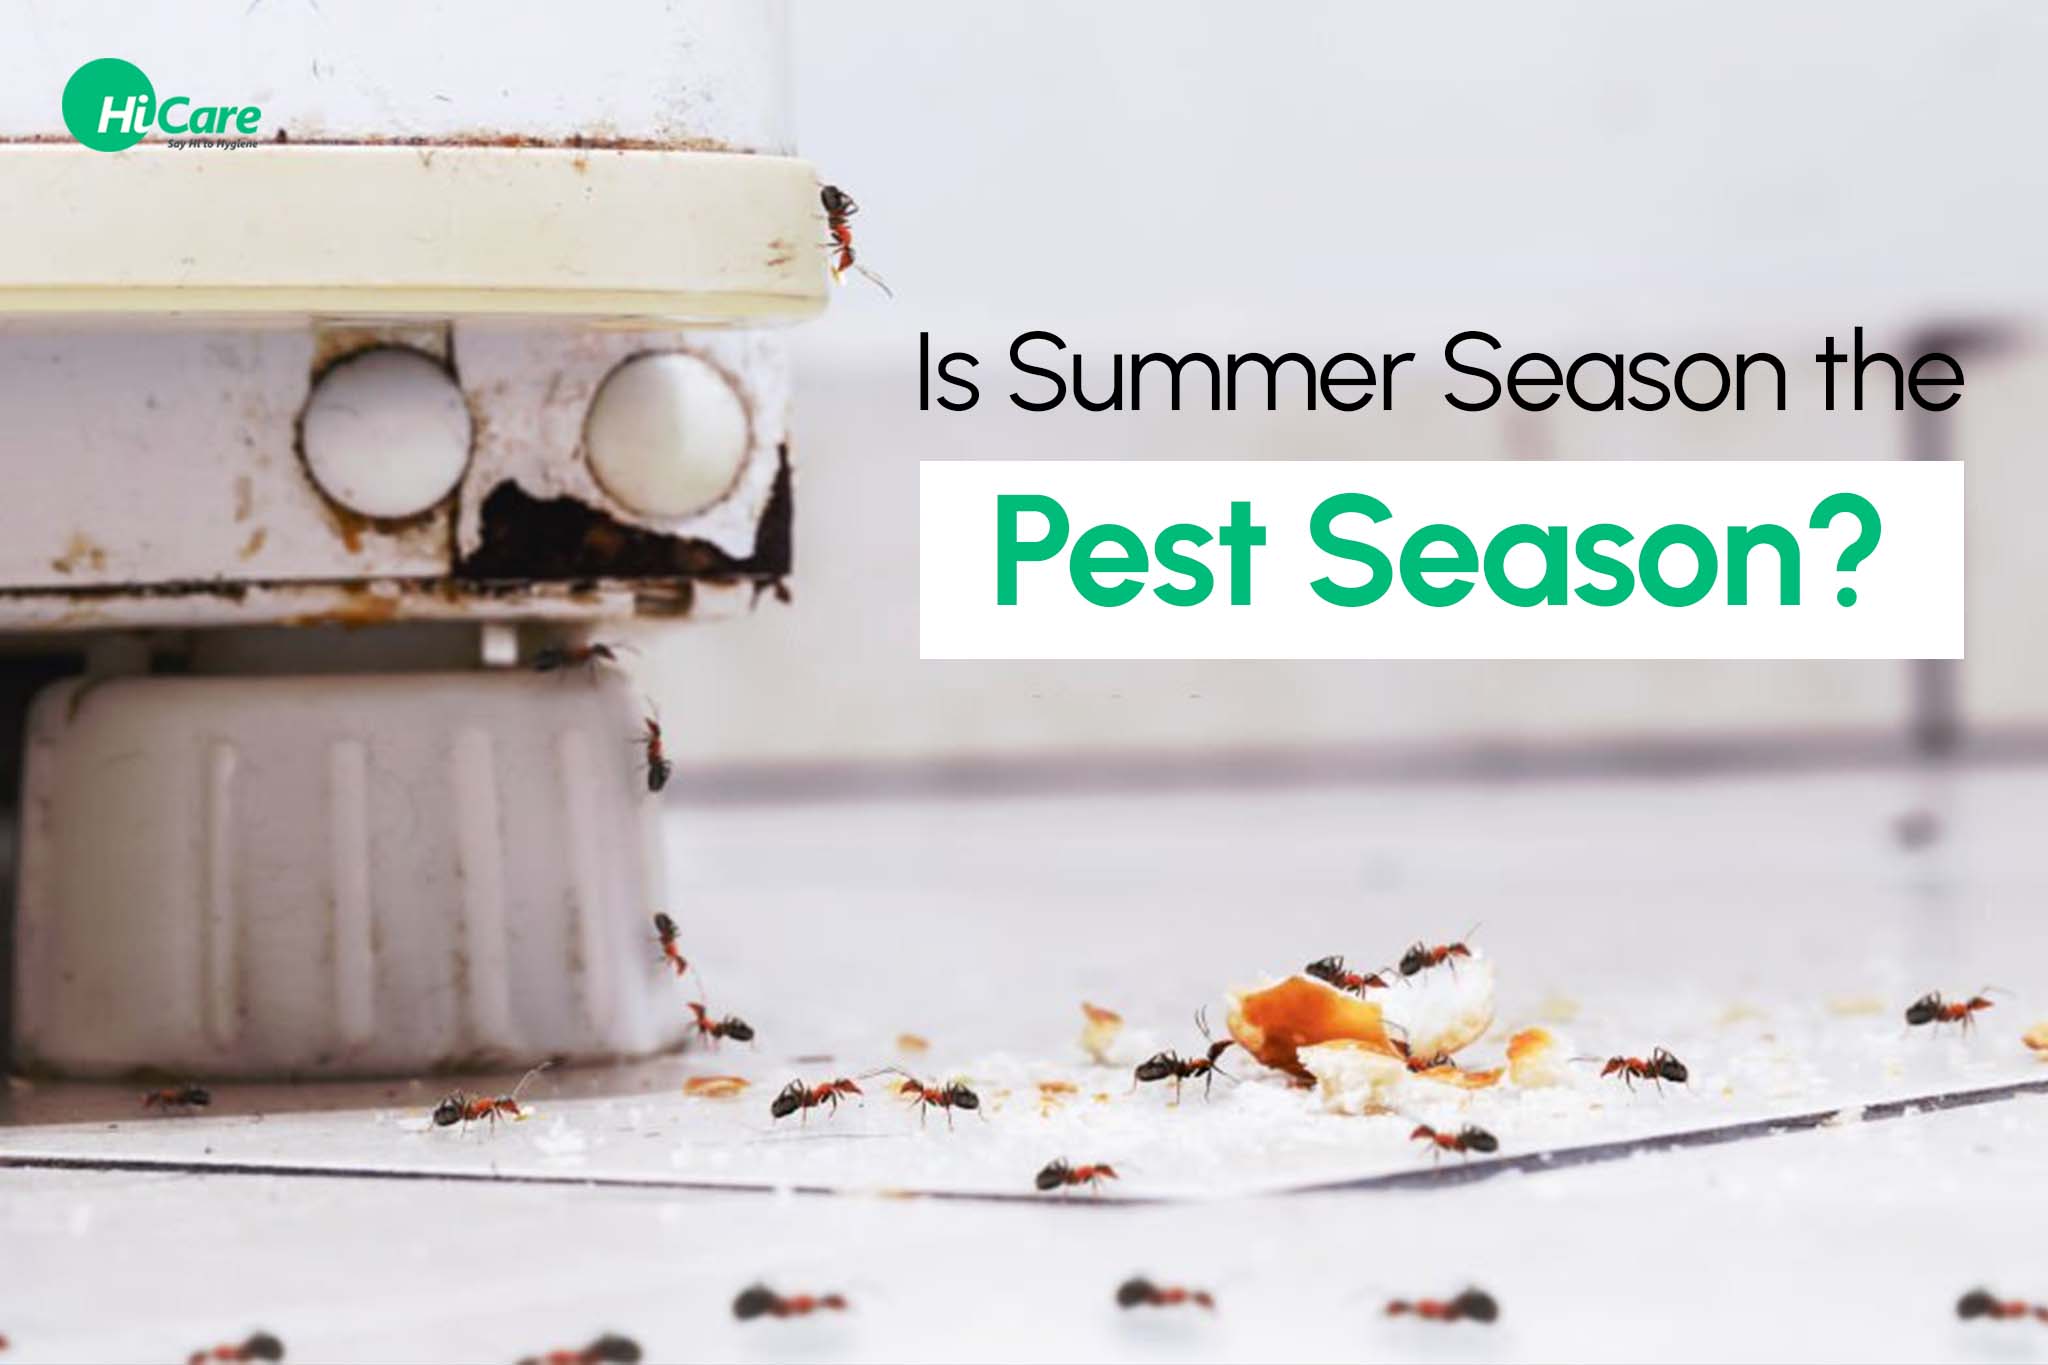 Summer Pest Control: 5 Reasons Why Pests loves the Summer Season